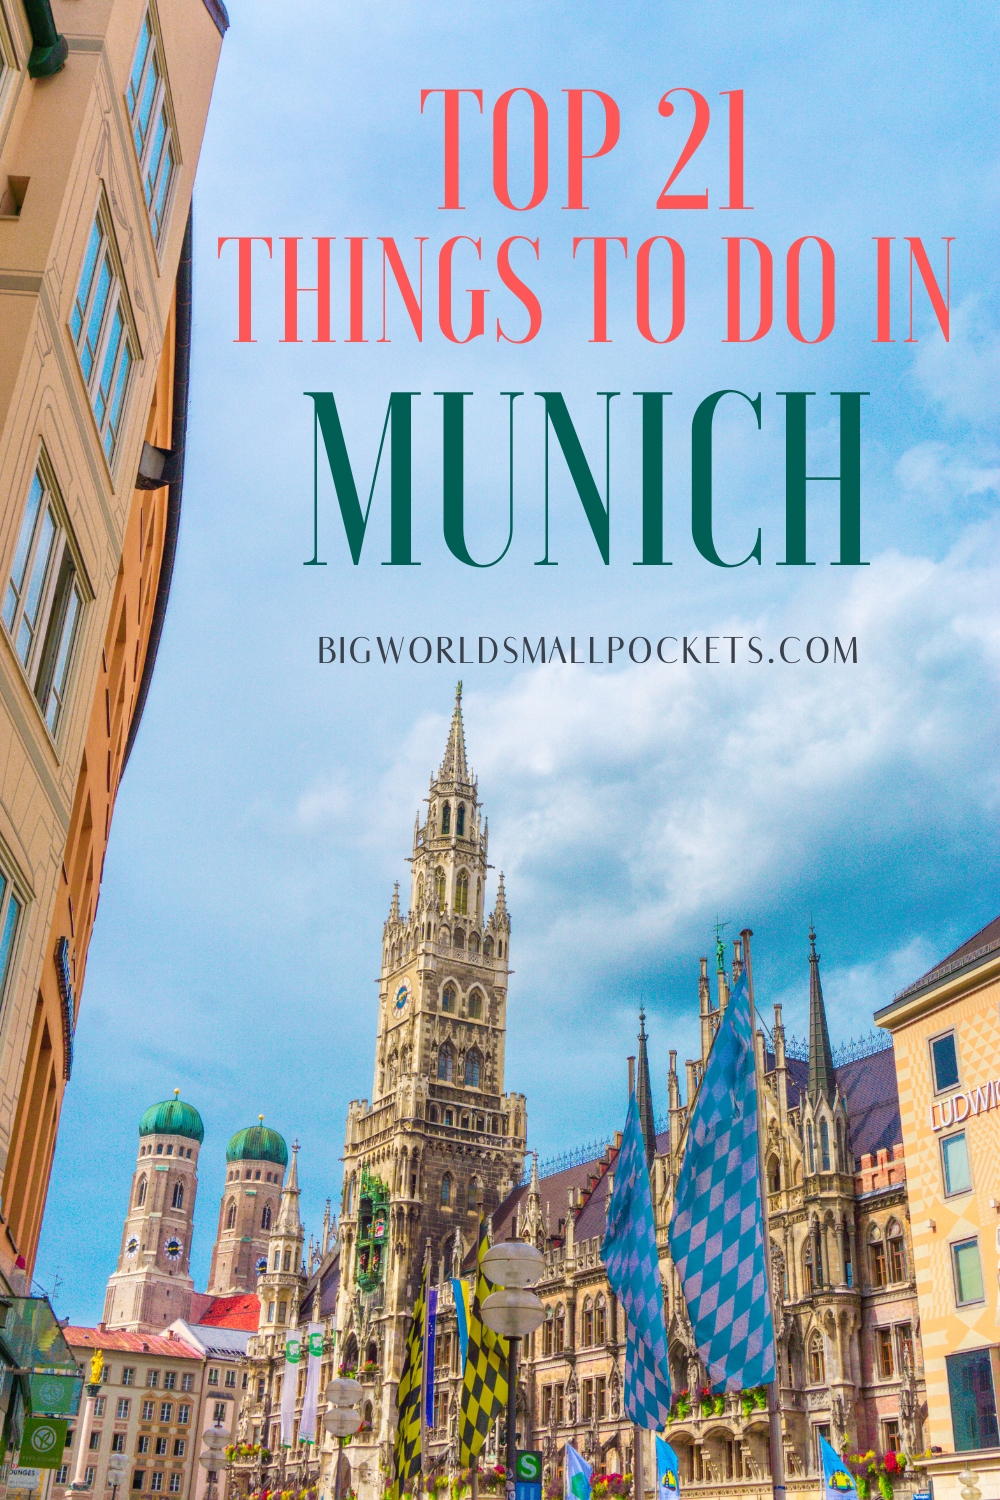 Top 21 Things to Do in Munich You Can't Miss!